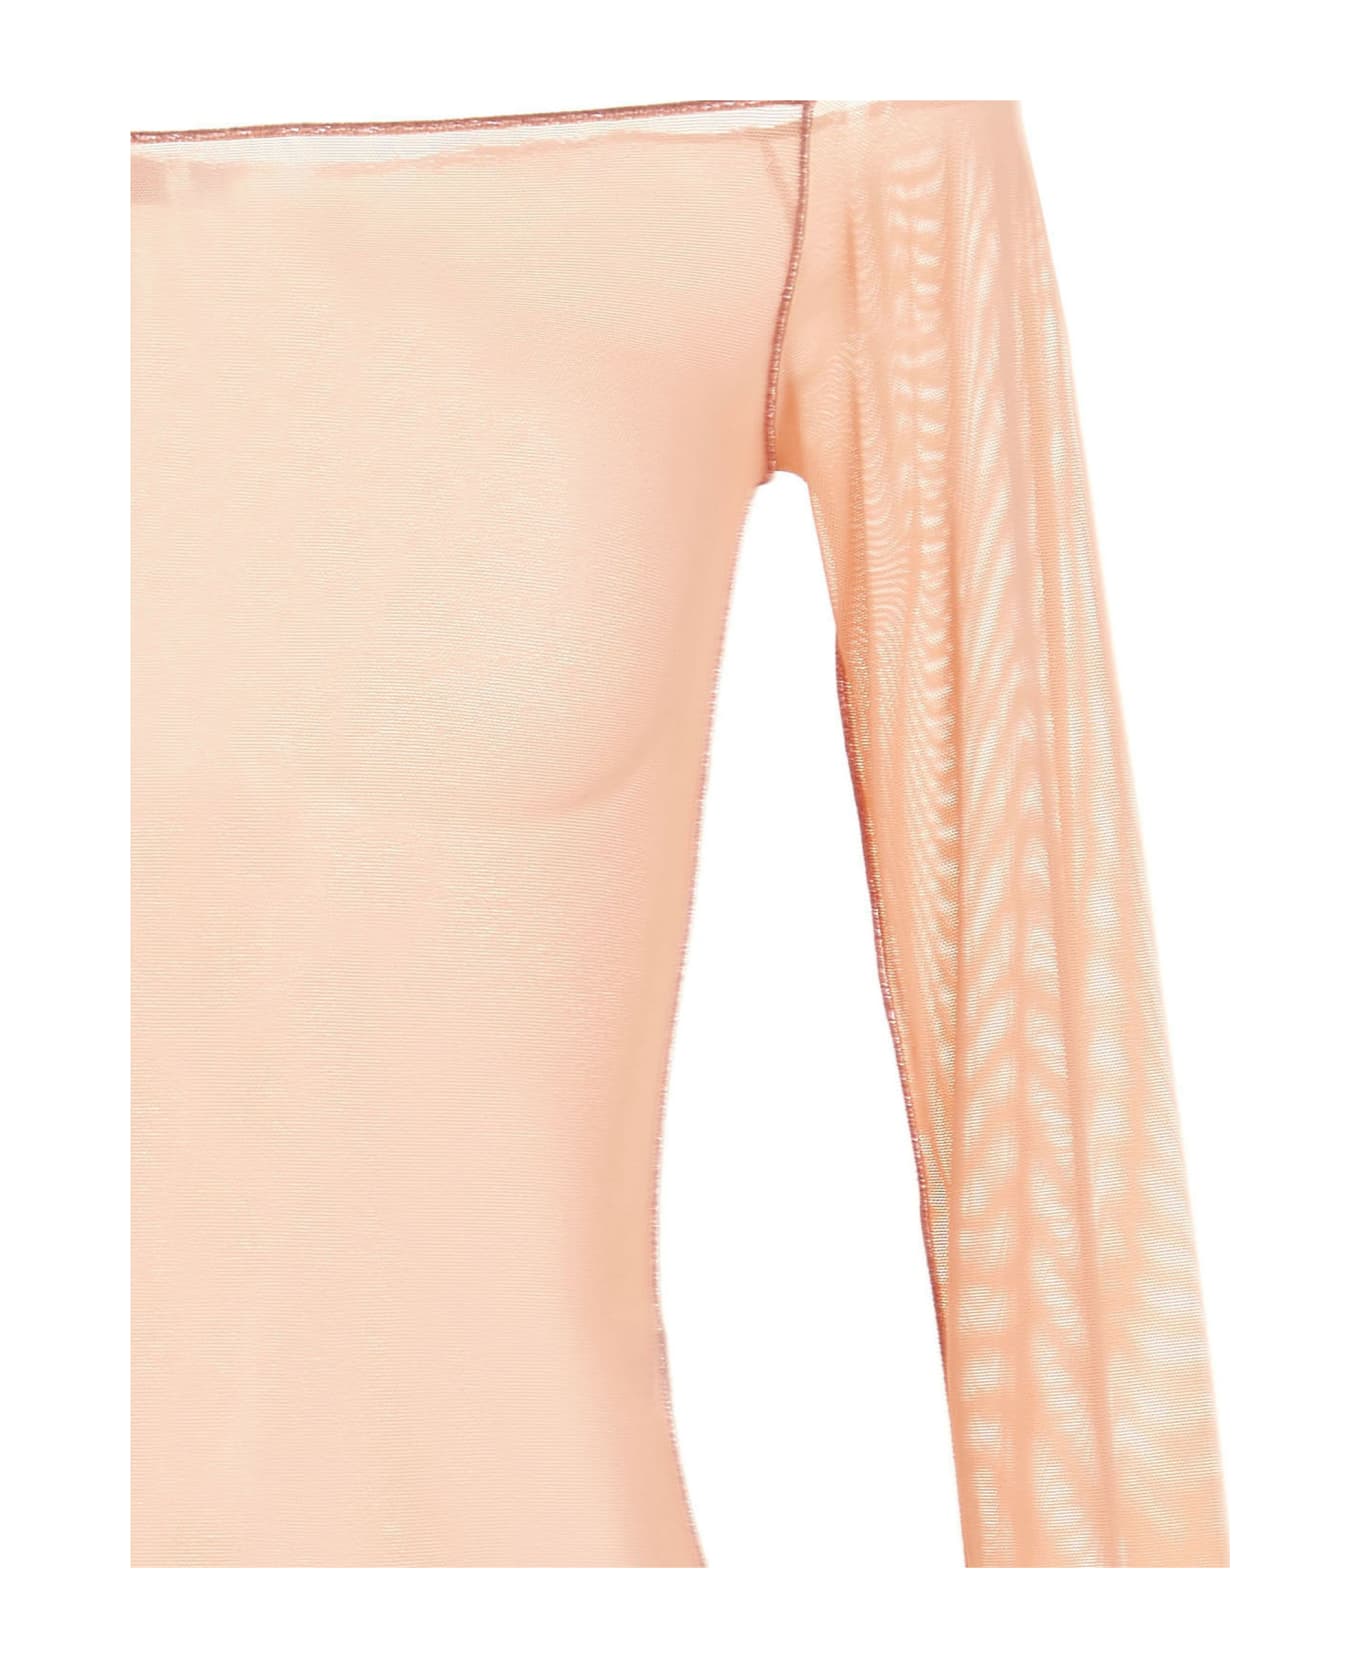 Oseree Feather Transparent Mesh Bodysuit - Pink